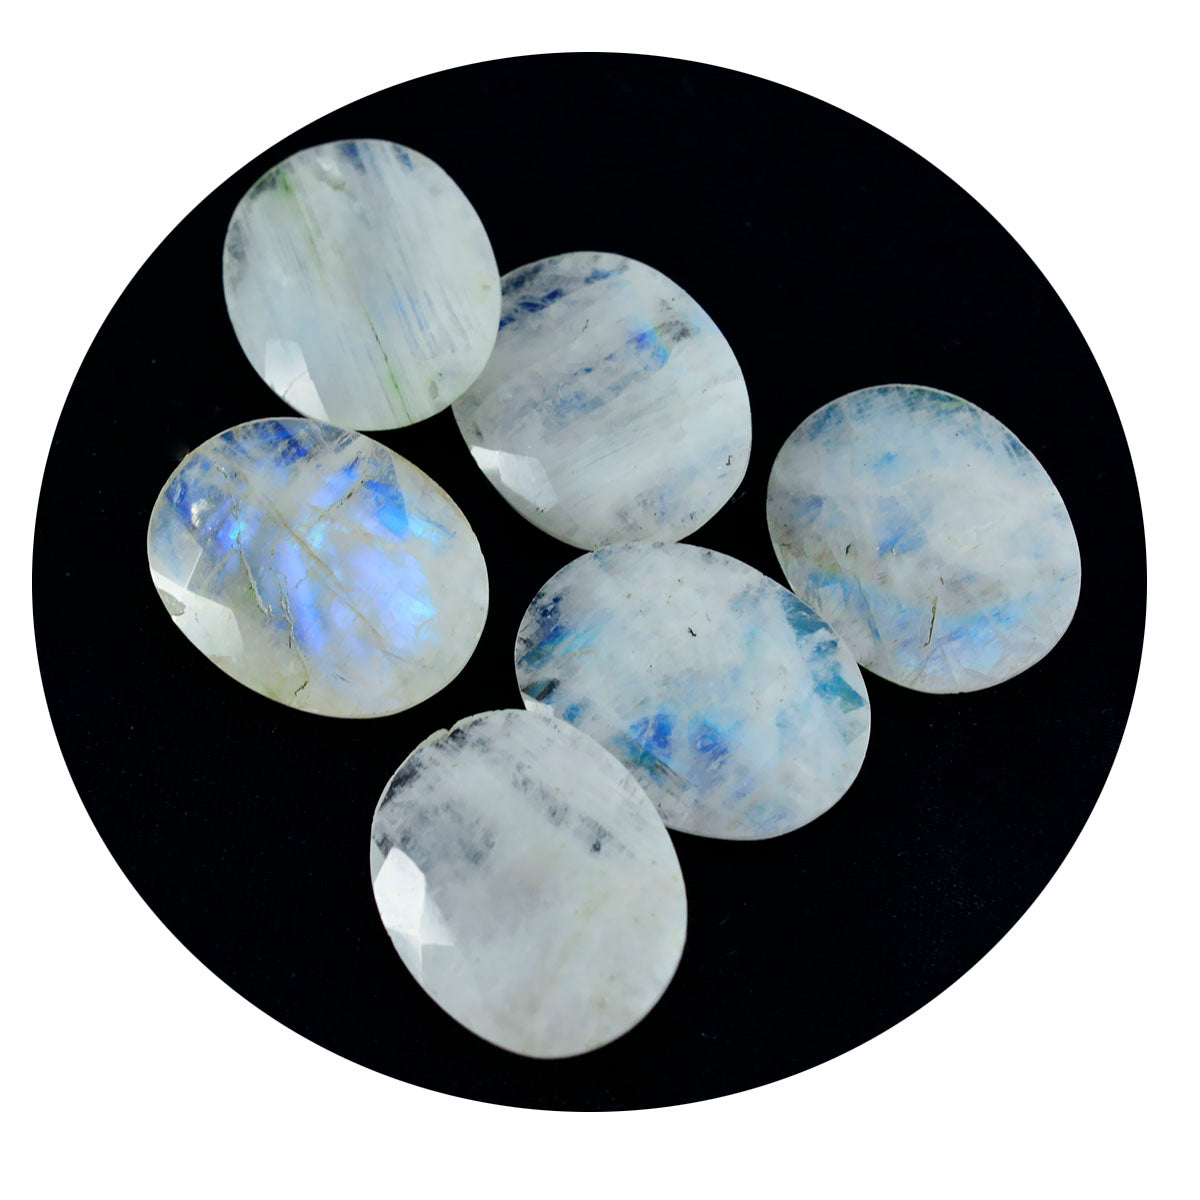 Riyogems 1PC White Rainbow Moonstone Faceted 12x16 mm Oval Shape attractive Quality Loose Stone